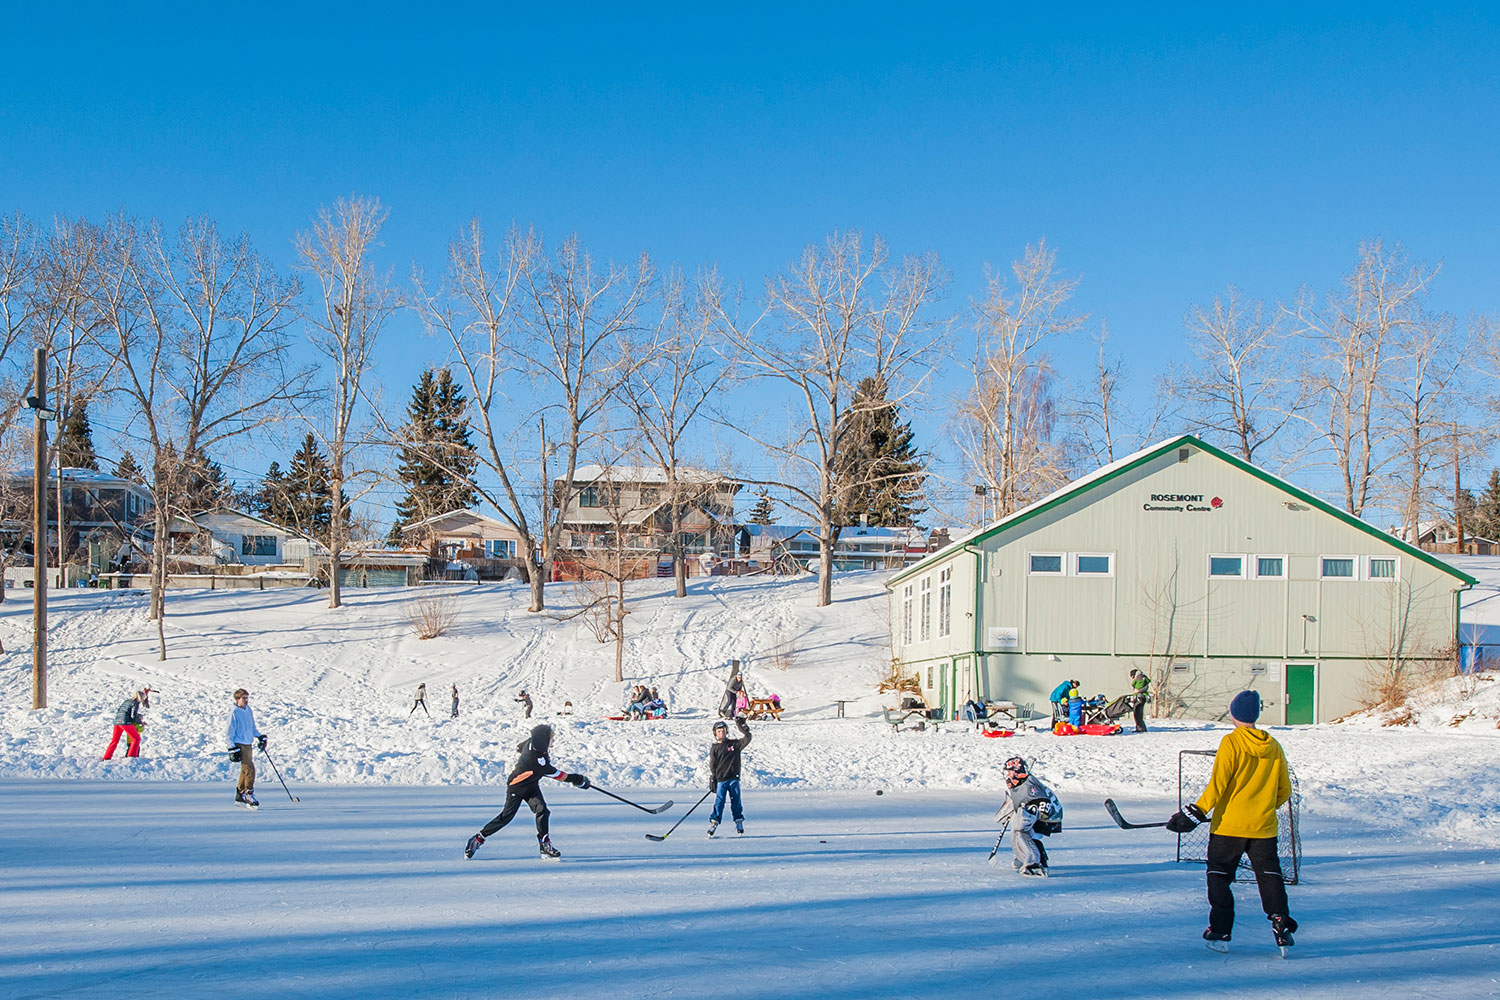 Volunteers put in hundreds of hours of work each year to keep community rinks across the city in tip-top shape for neighbourhood residents of all ages to enjoy.
Cody Stuart / CREB®Now